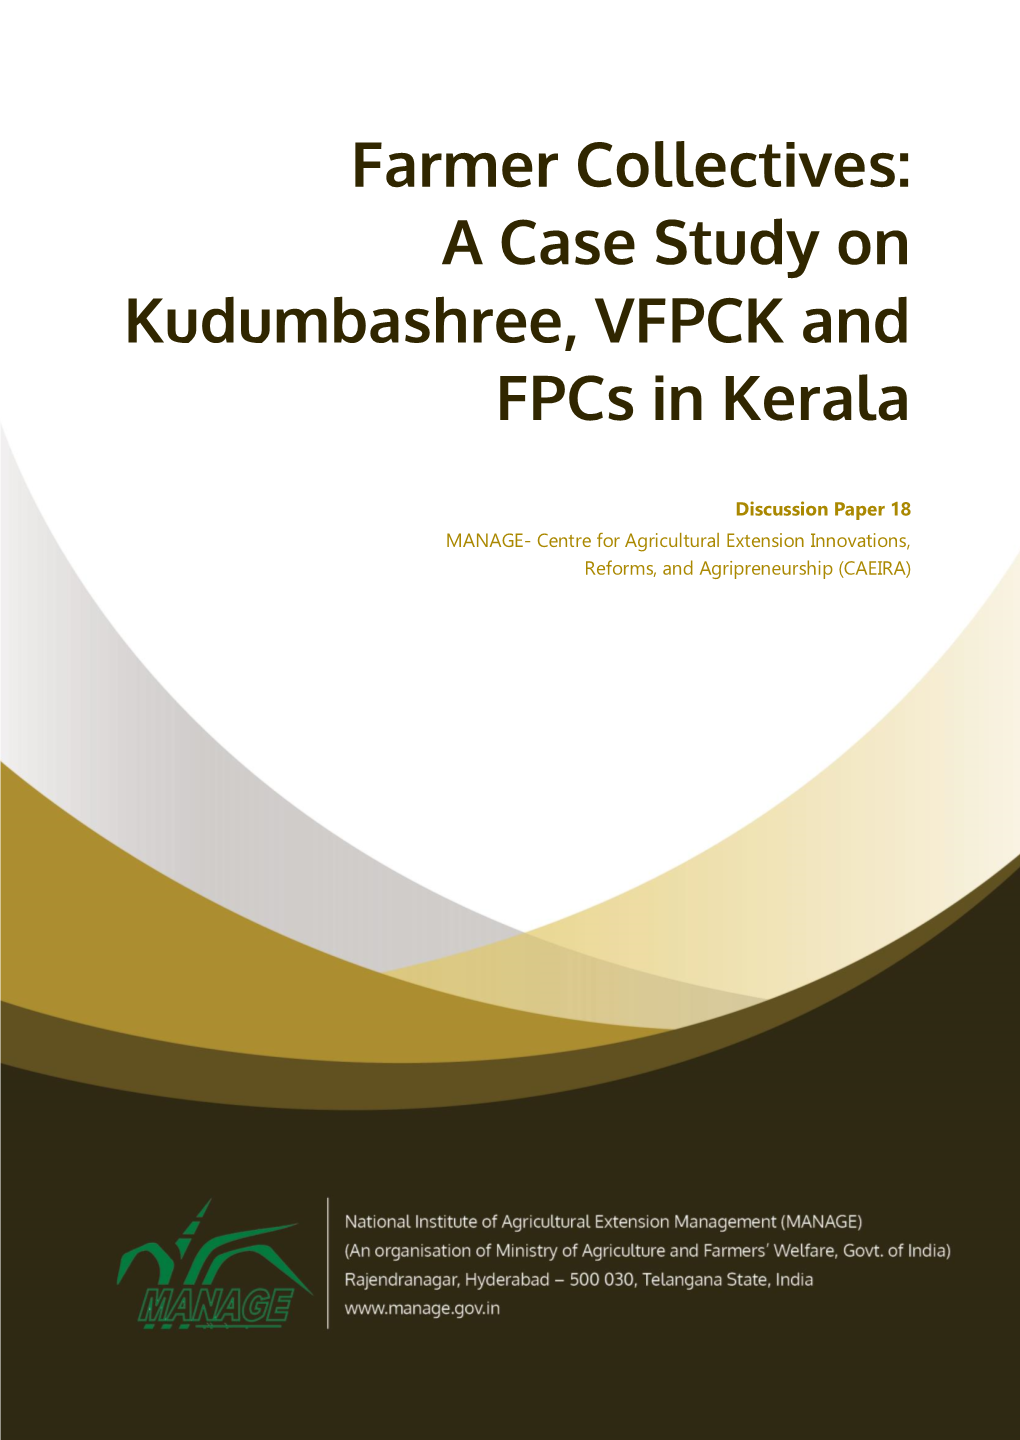 Discussion Paper 18: Farmer Collectives: a Case Study on Kudumbashree, VFPCK and Fpcs in Kerala